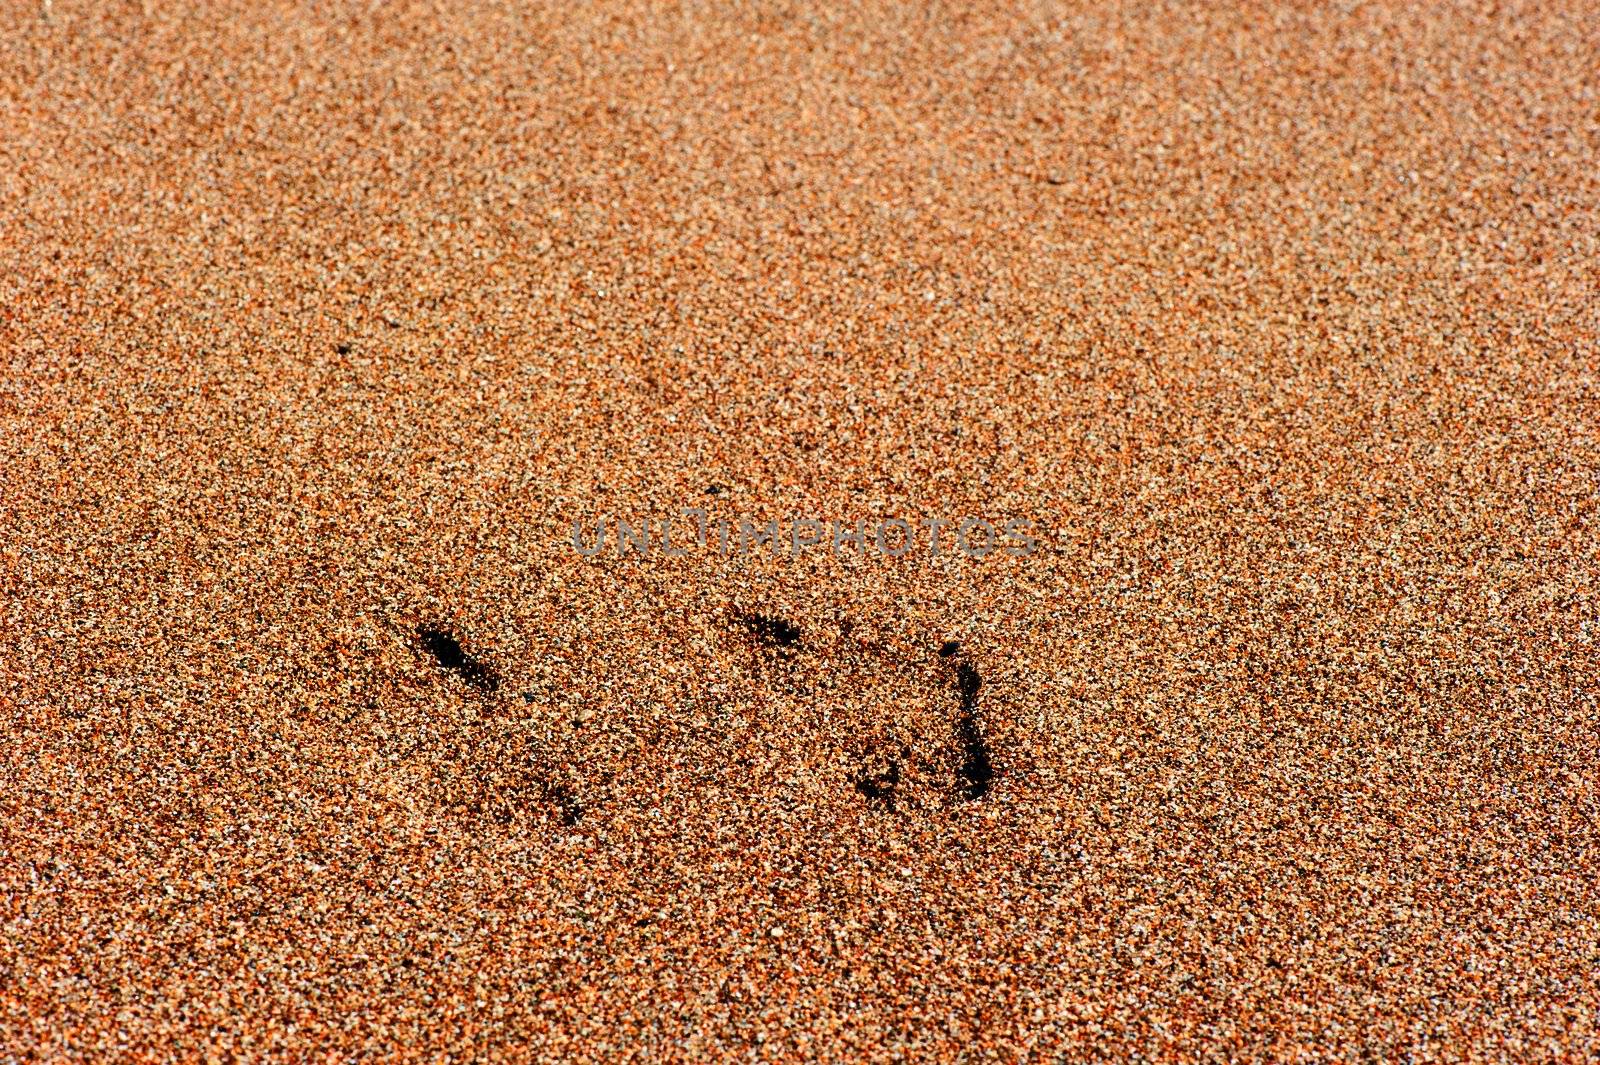 Traces of human feet in the sand beach